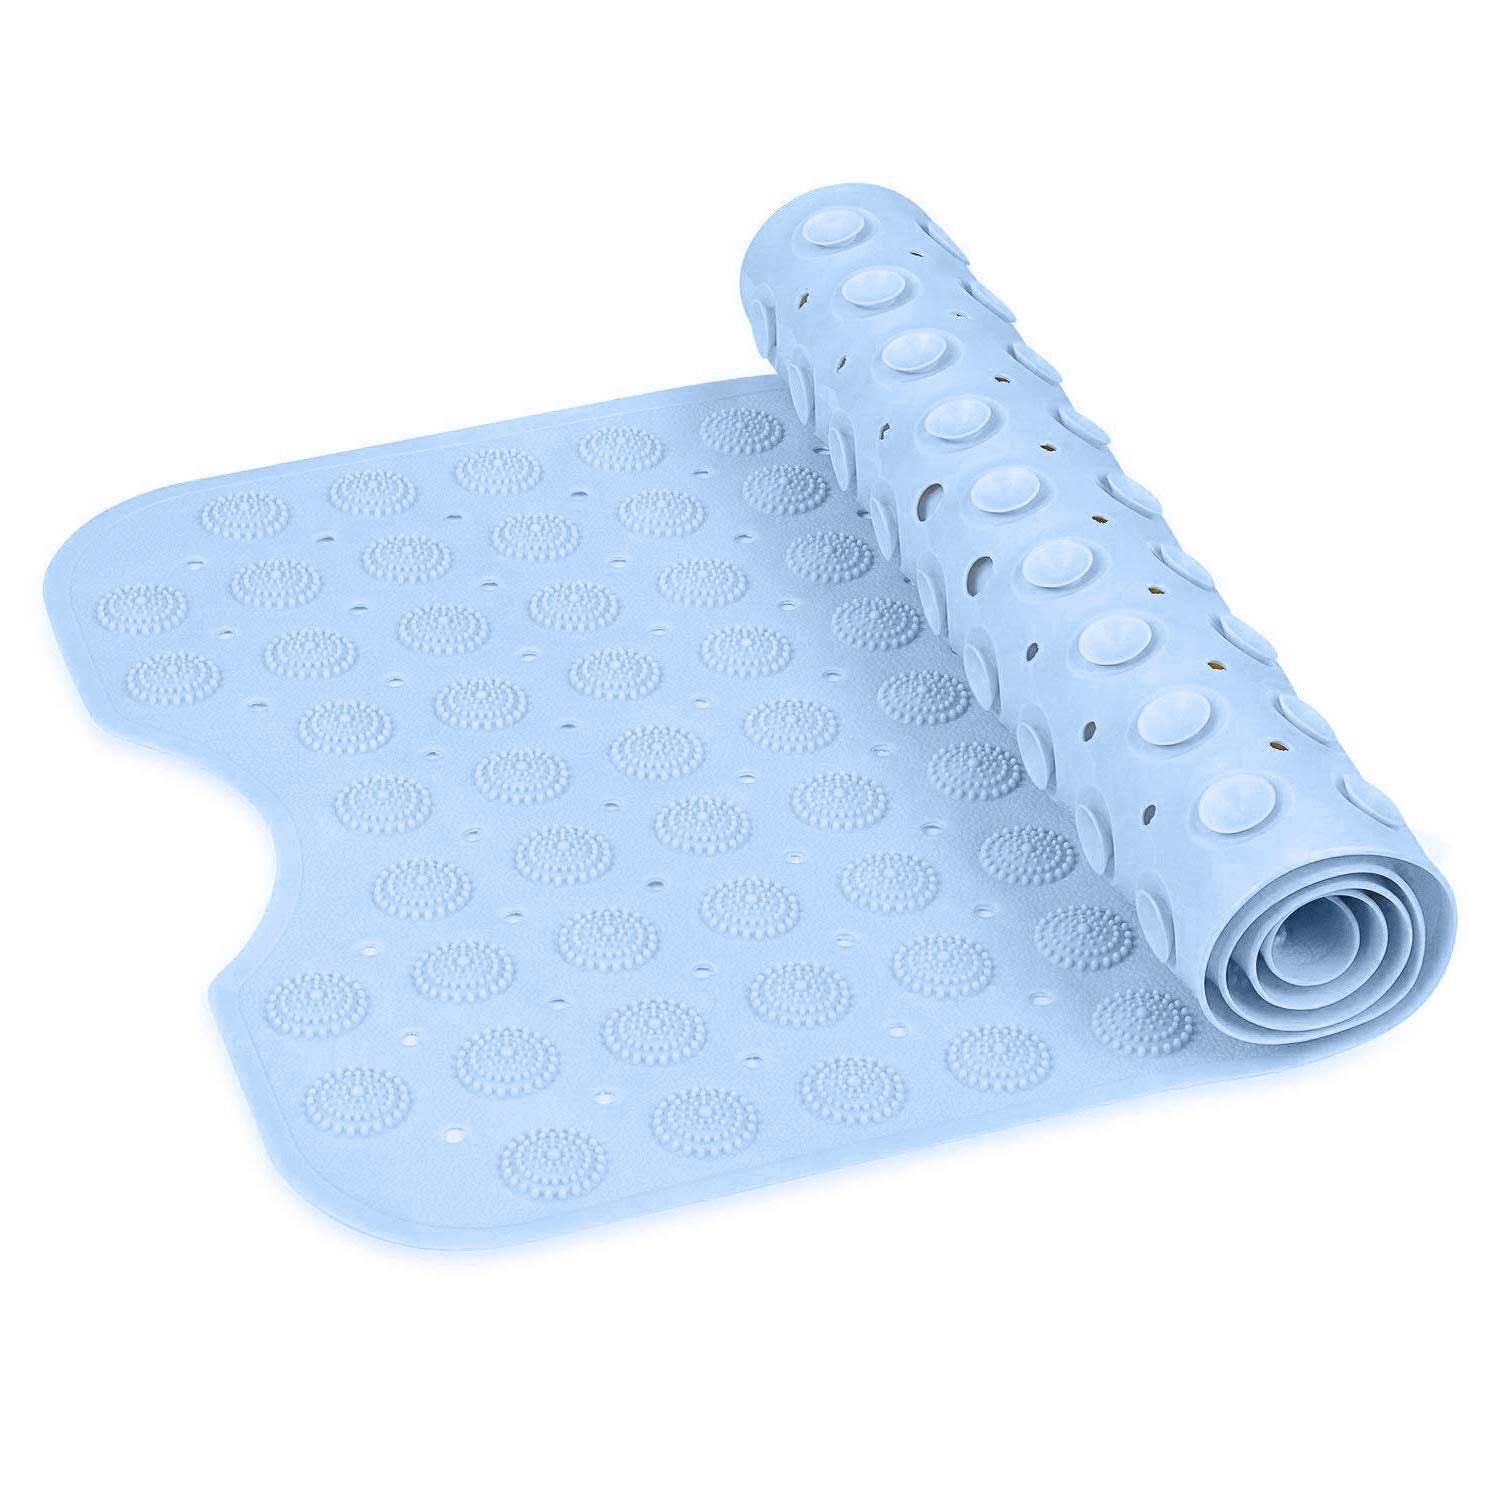 Experia Anti Slip Bath Mat with Suction Cup - 100 X 40 CM (Blue Color with Accu Pebble) LifeKrafts